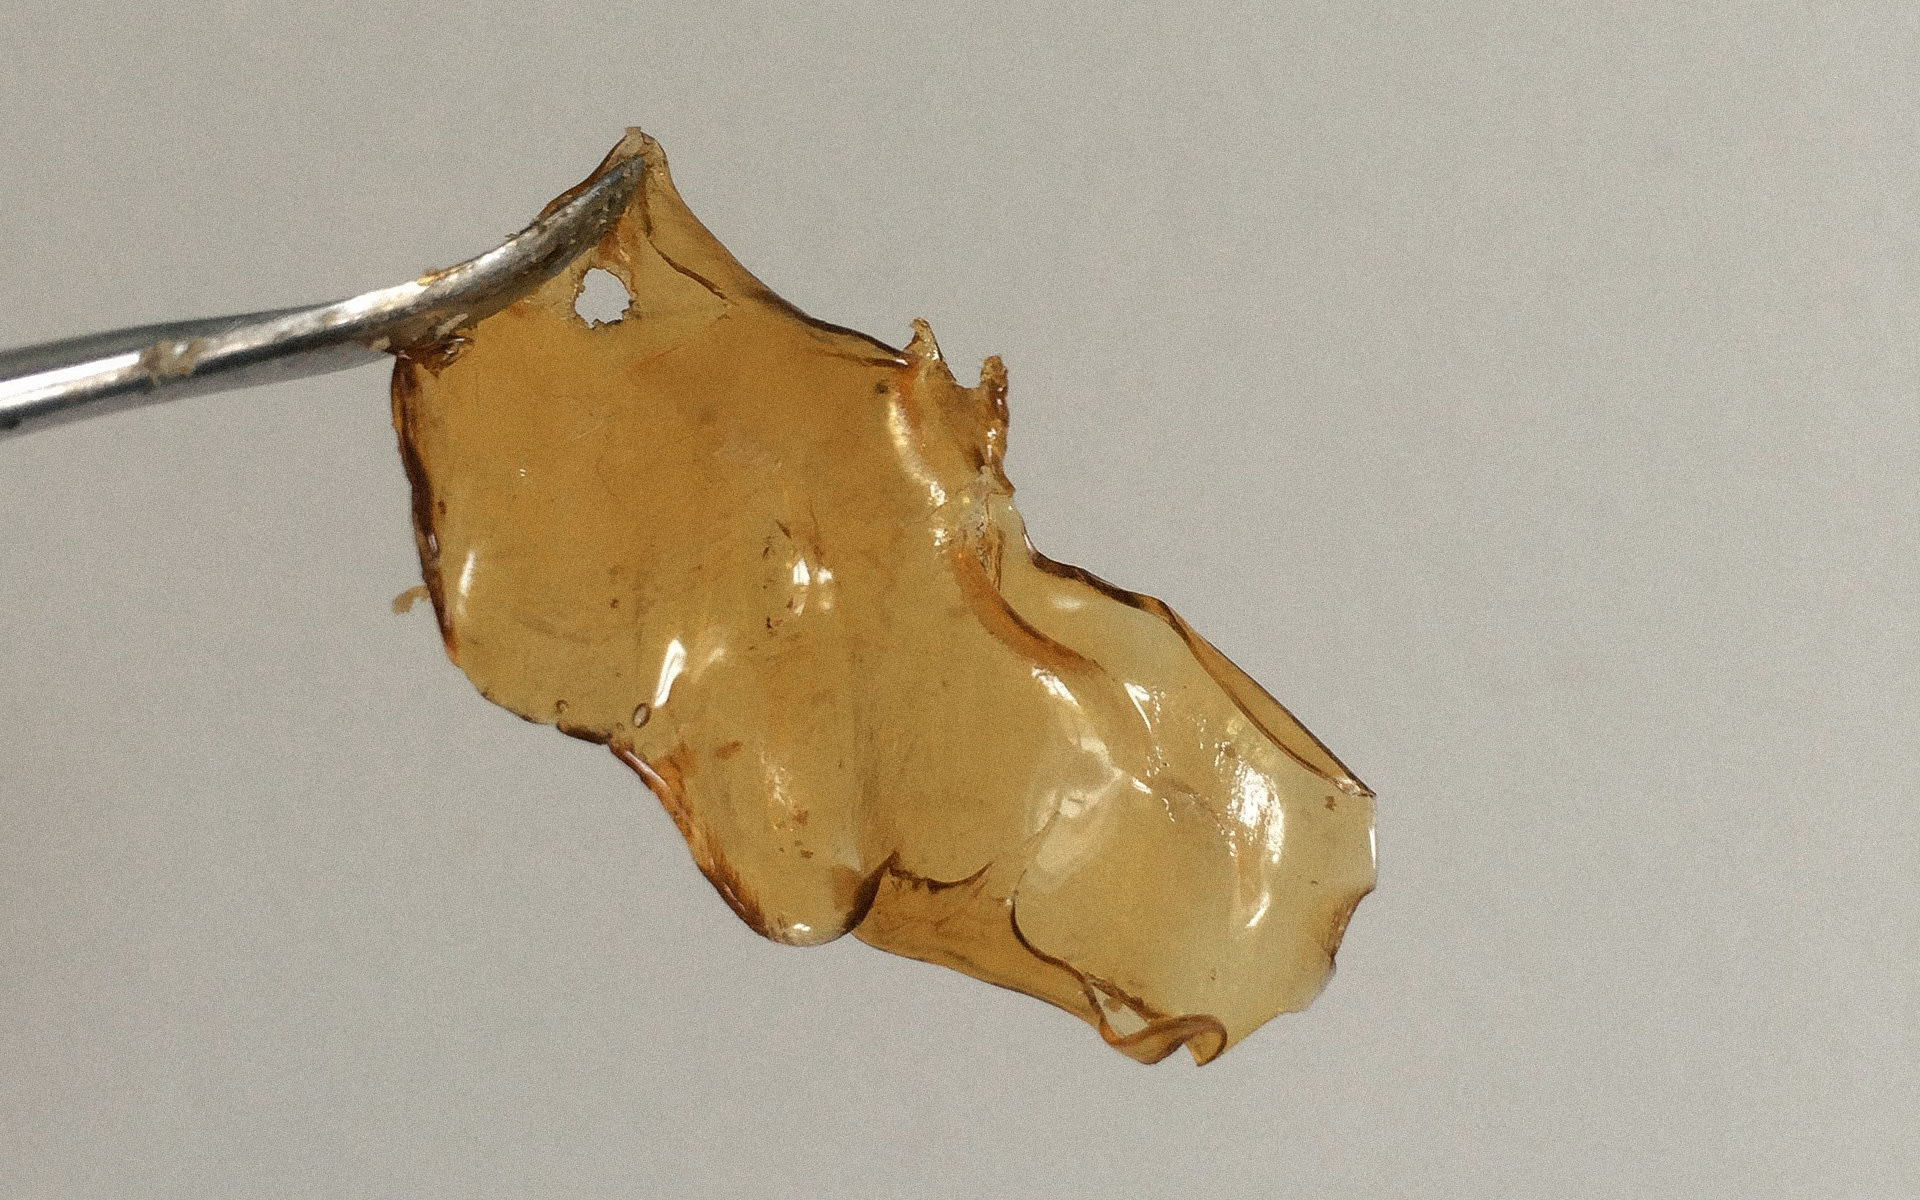 How To Smoke Dabs Without A Rig  Pros and Cons Of Few Methods